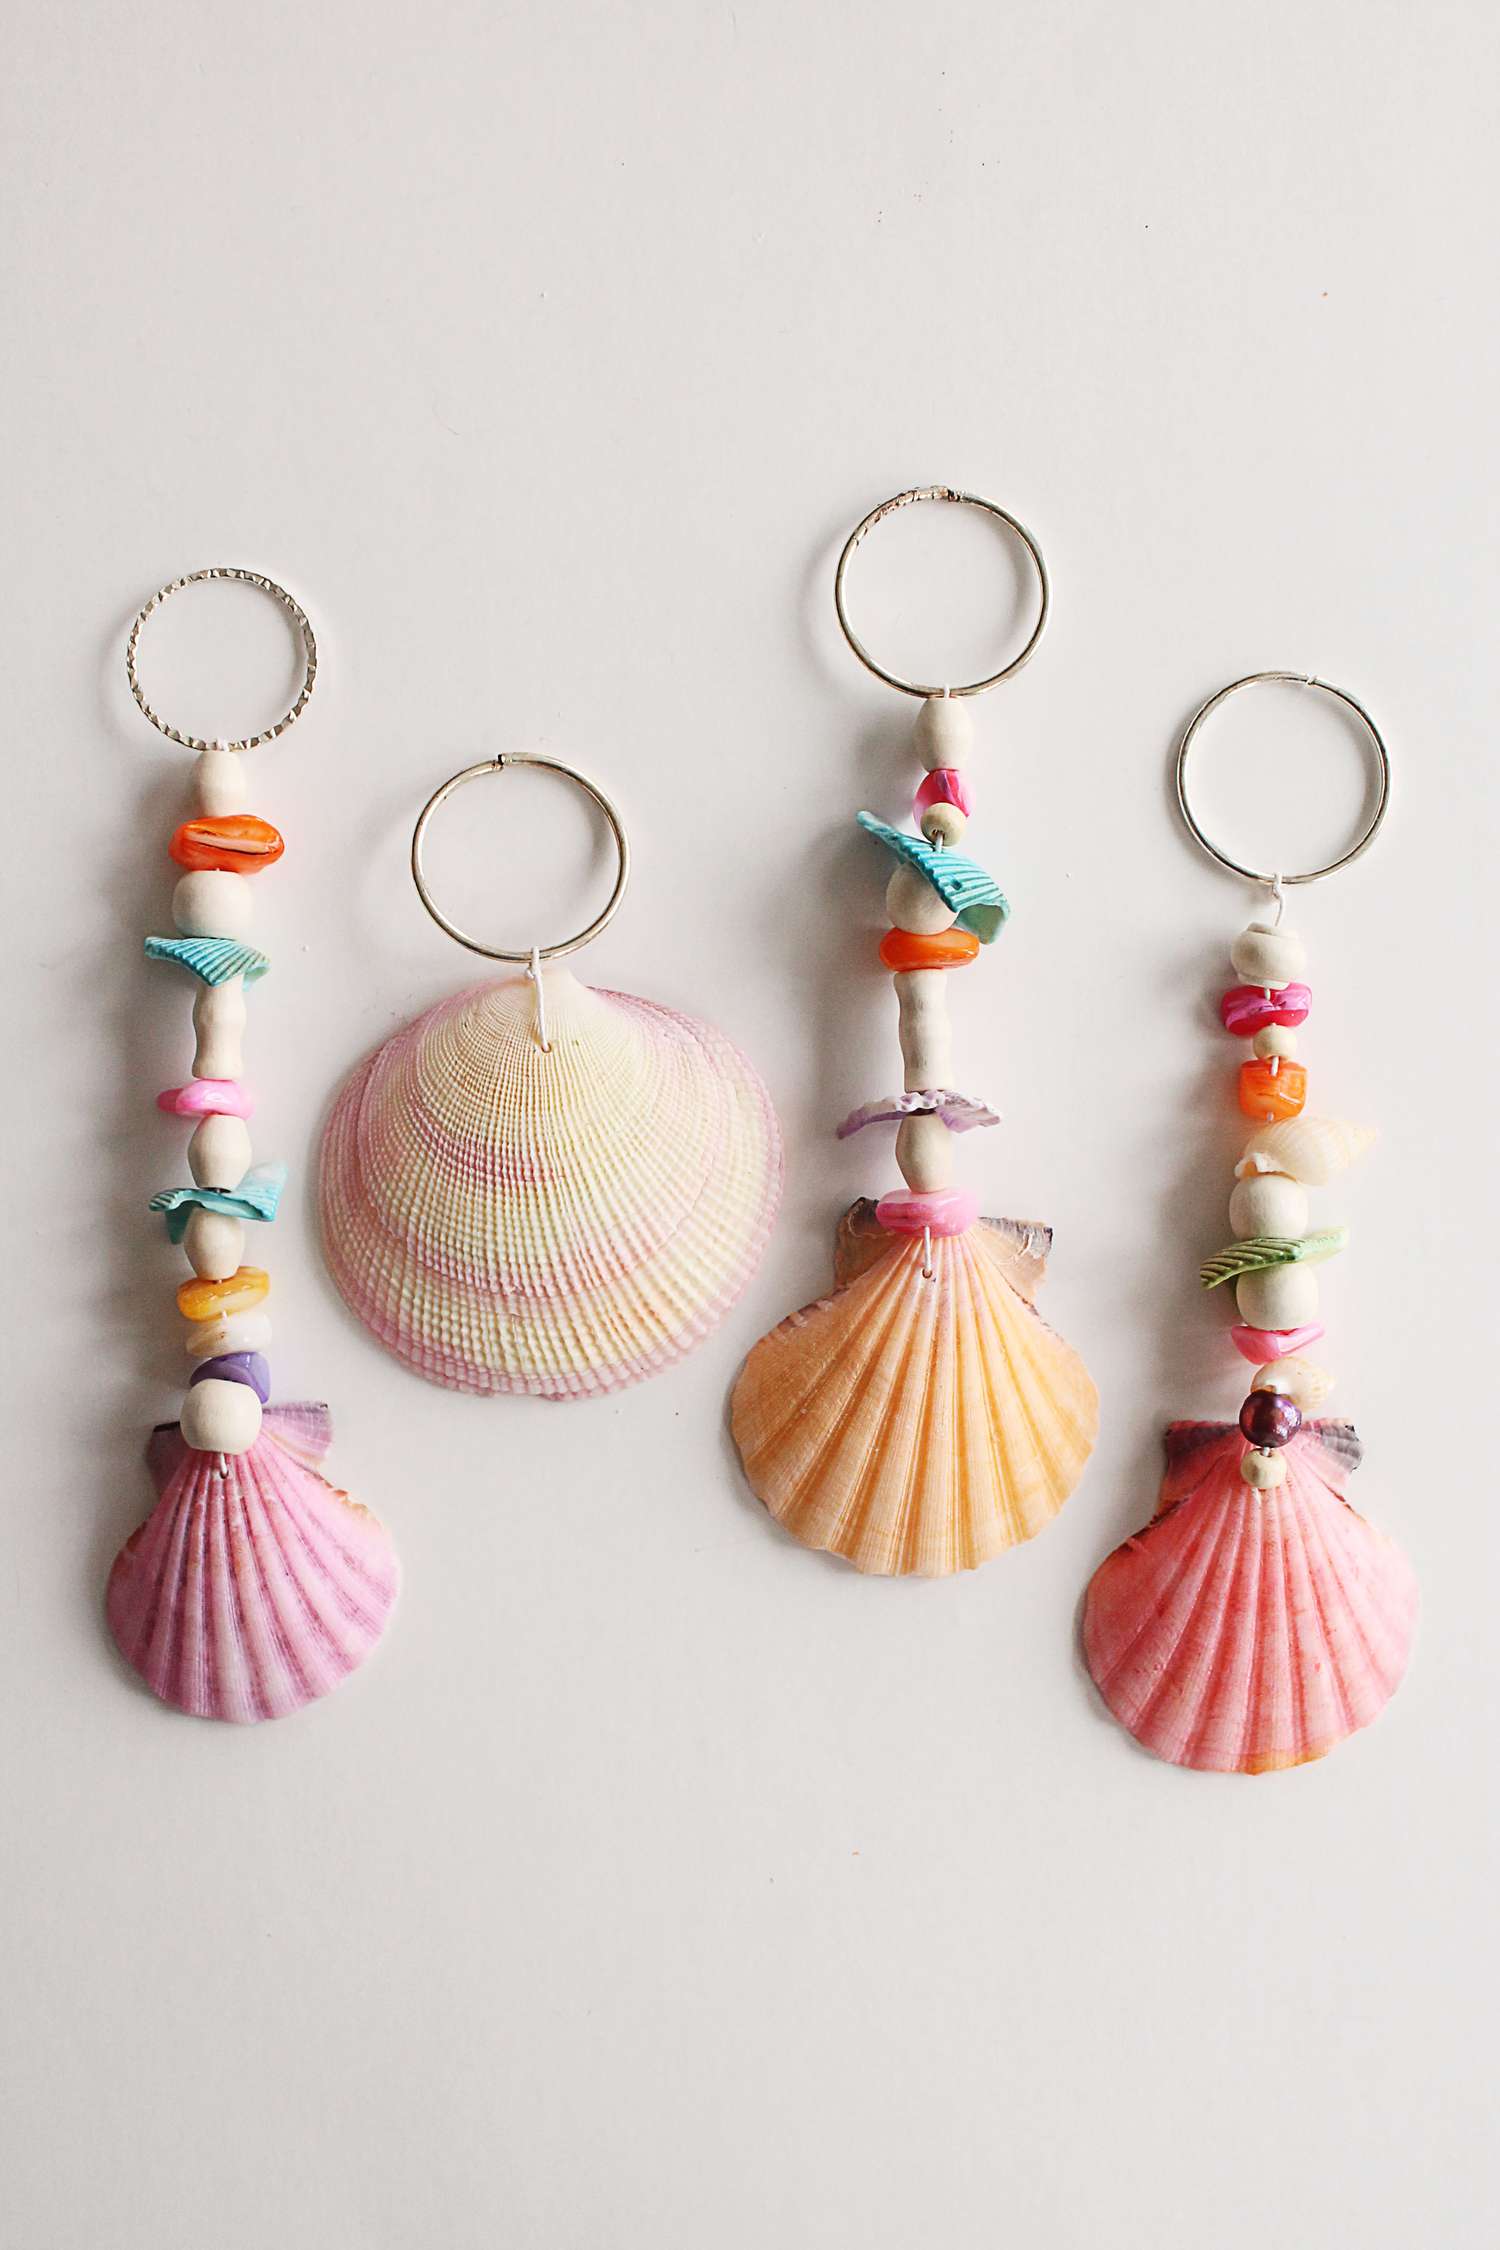 Diy Seashell Crafts For Adults